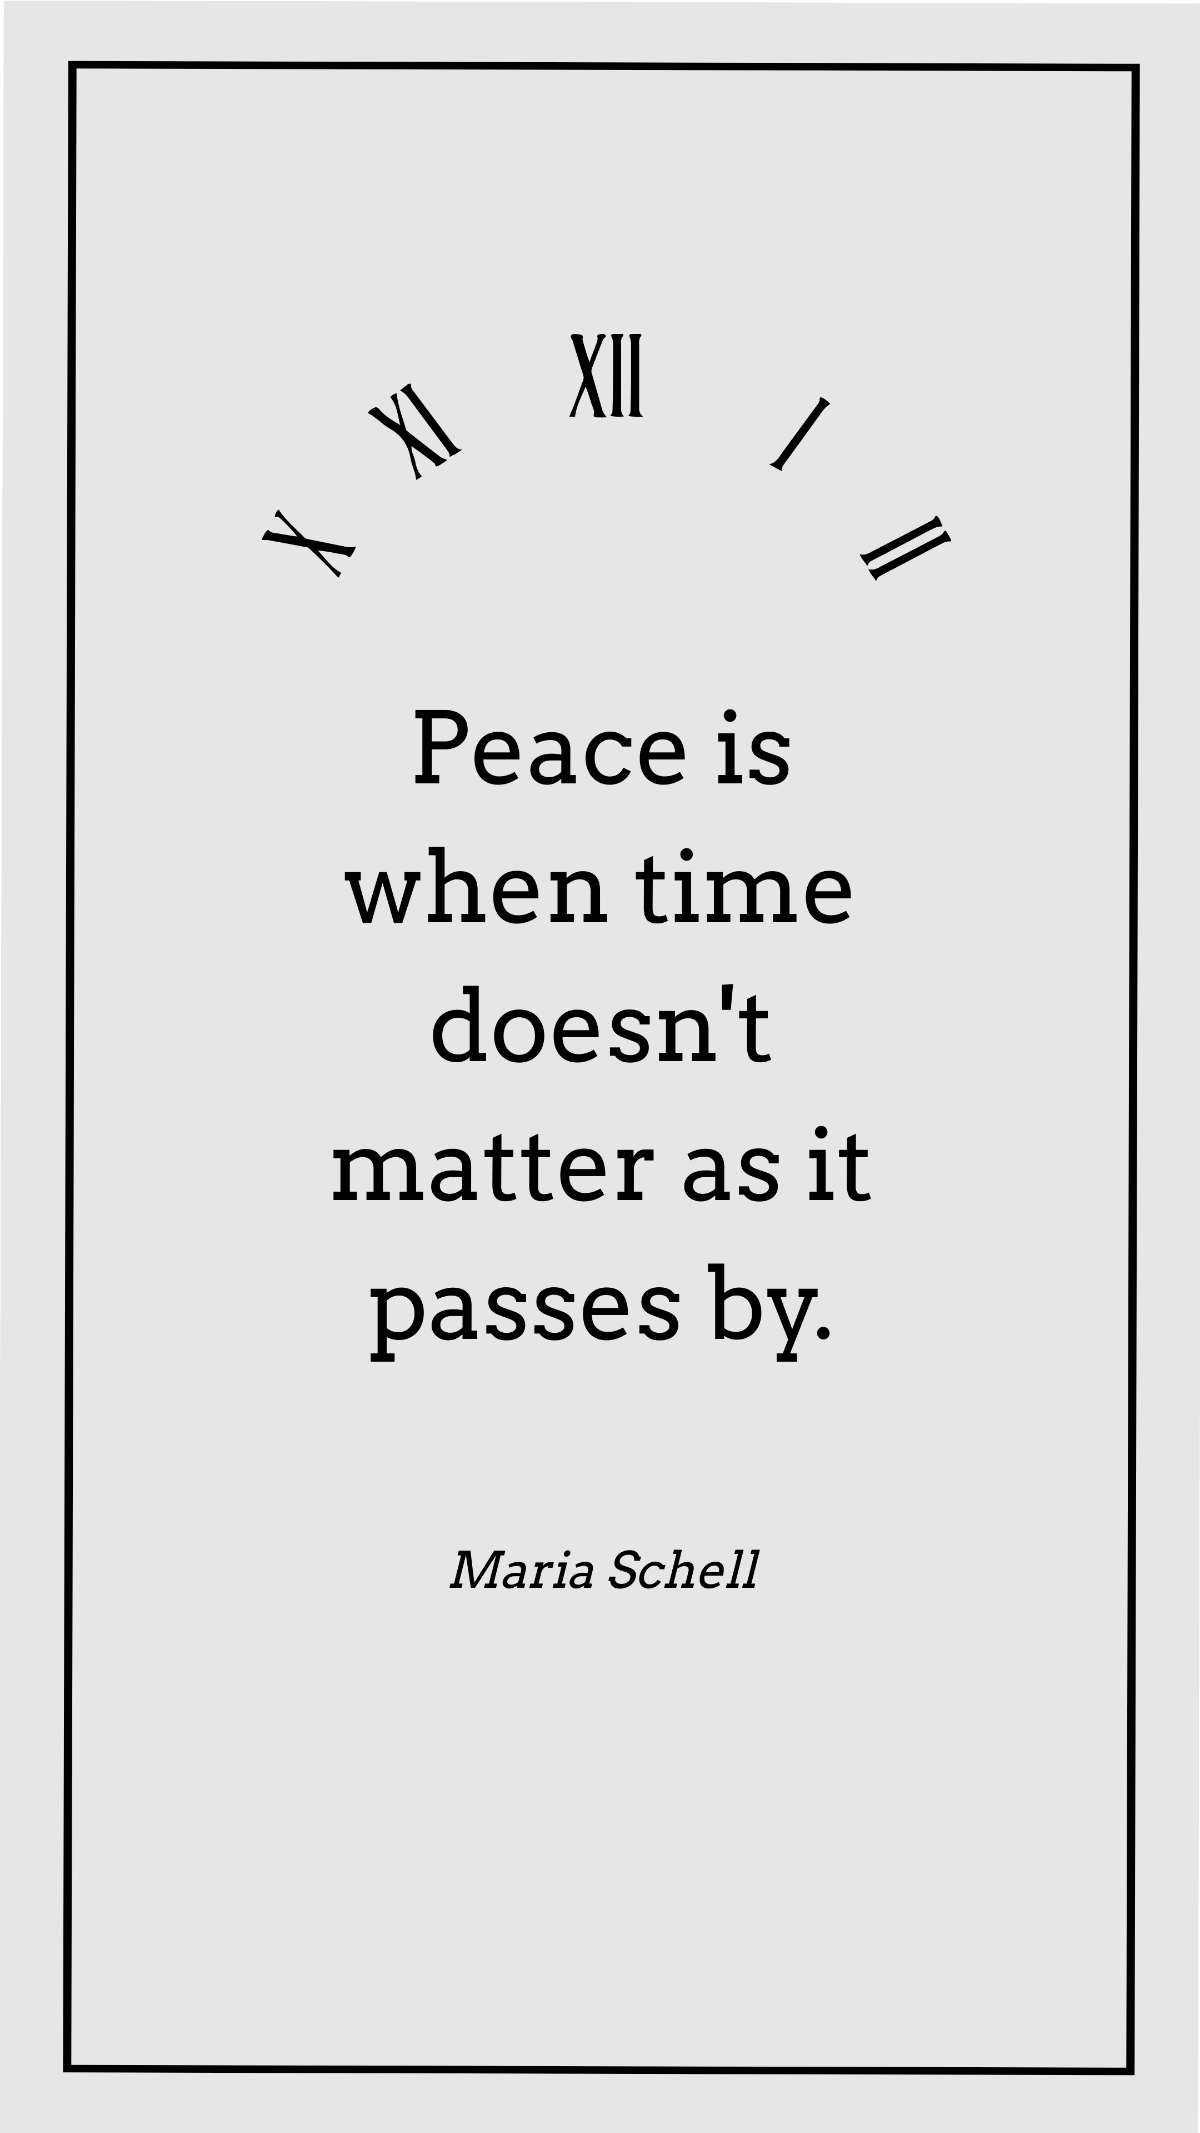 Maria Schell - Peace is when time doesn't matter as it passes by. Template